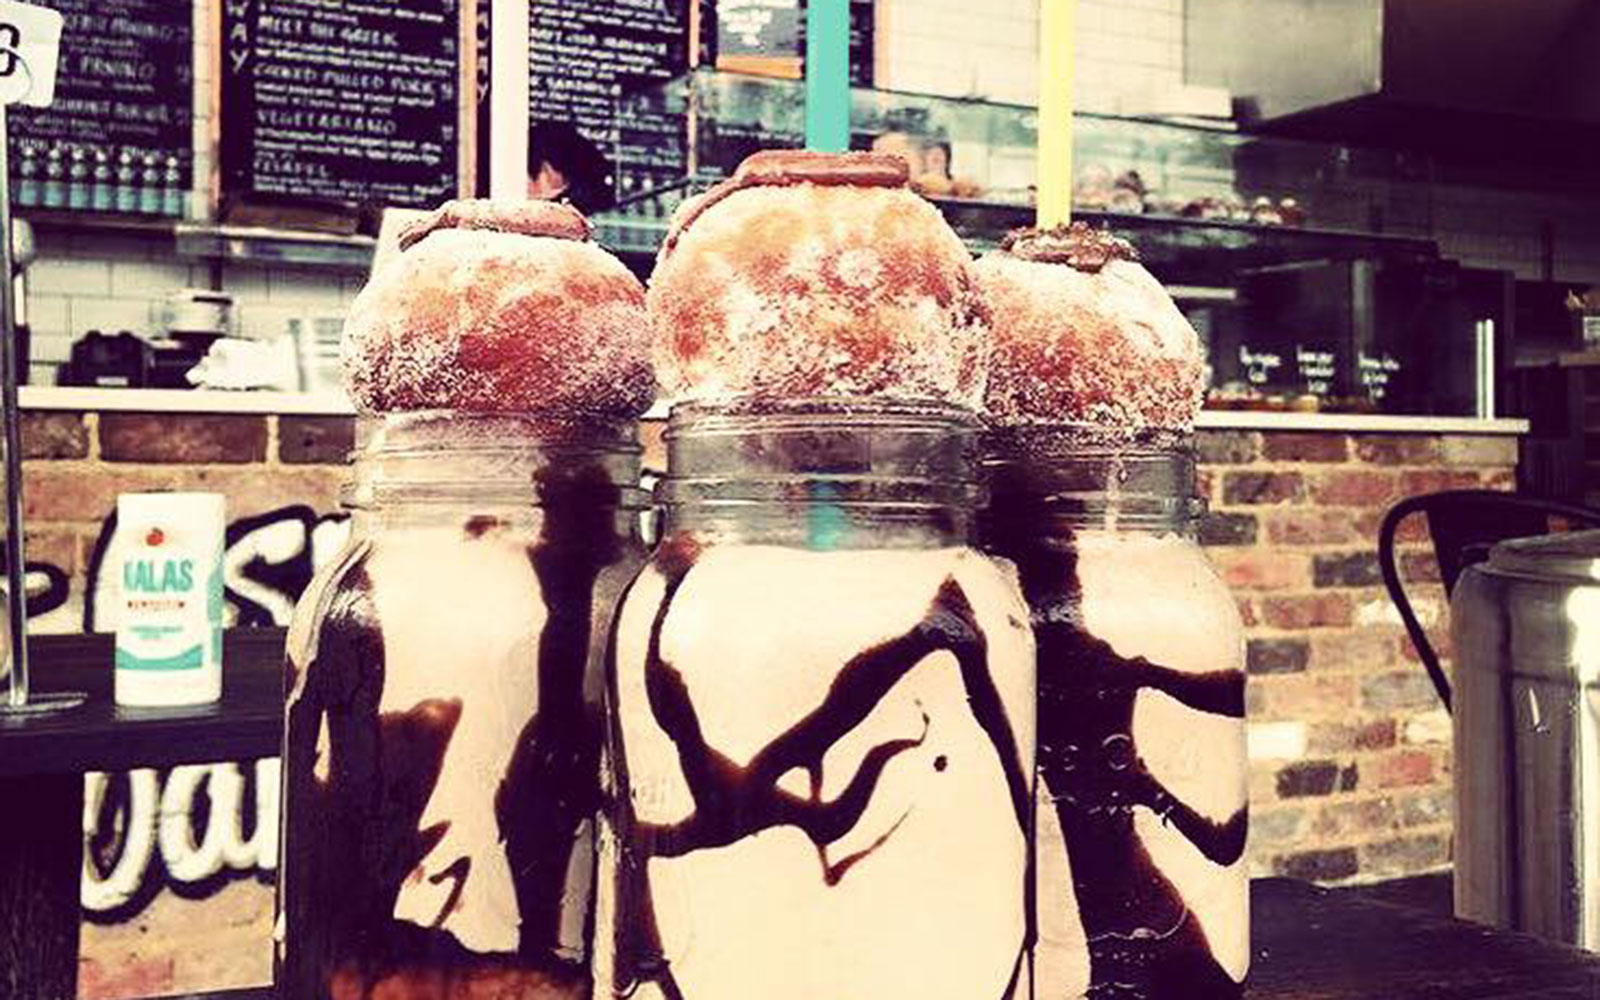 Behold, a Nutella Milkshake Topped with a Nutella-Filled Doughnut Ball